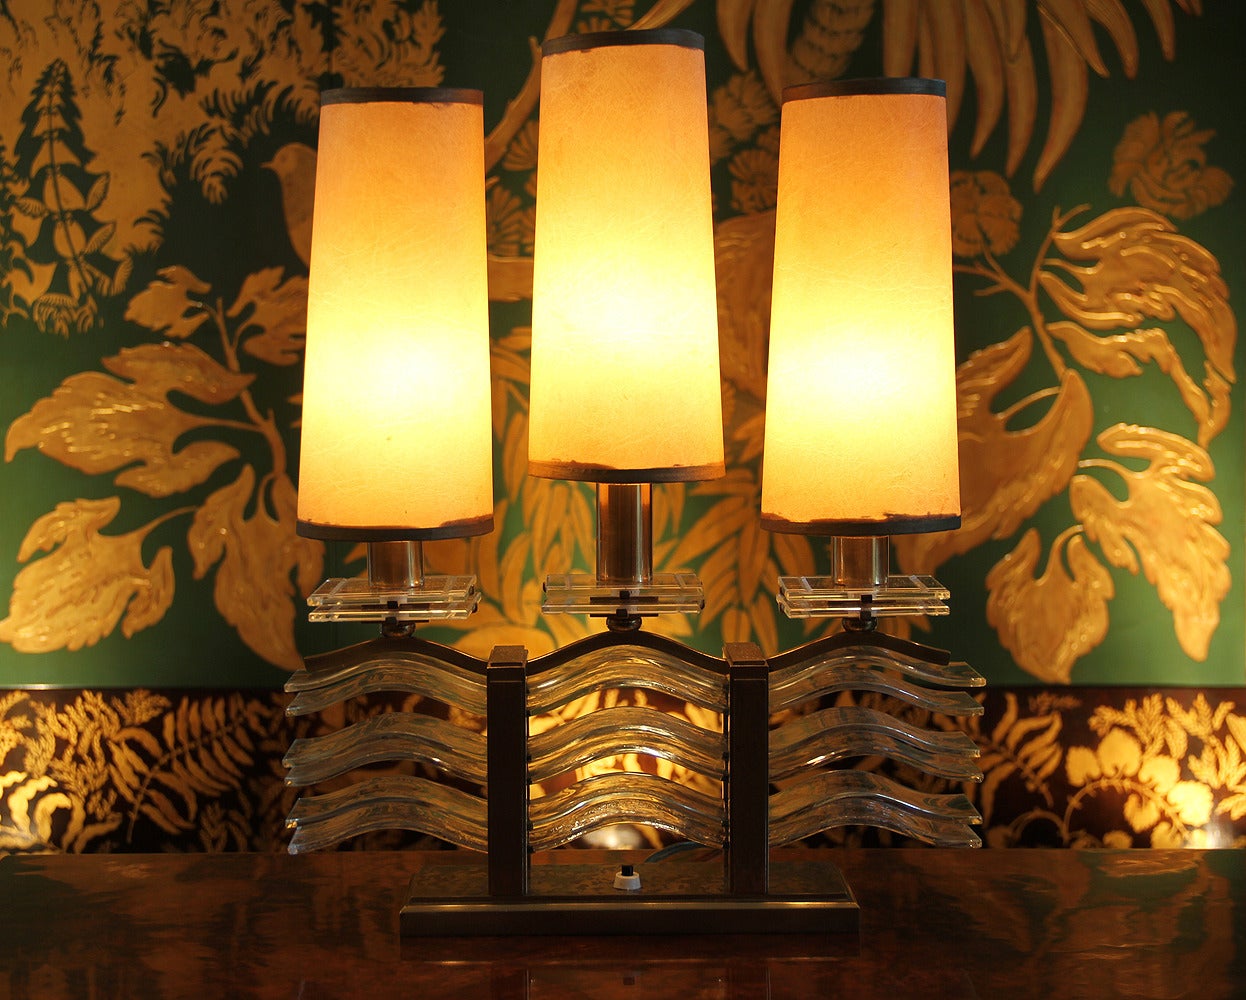 Marius-Ernest Sabino (1878-1961).

Spectacular pair of oxidized bronze and glass table lamps. Probably one of the most beautiful high-end models by Sabino.
Each glass wave has an amazing yellowish reflect with bubble inclusions, these beautiful